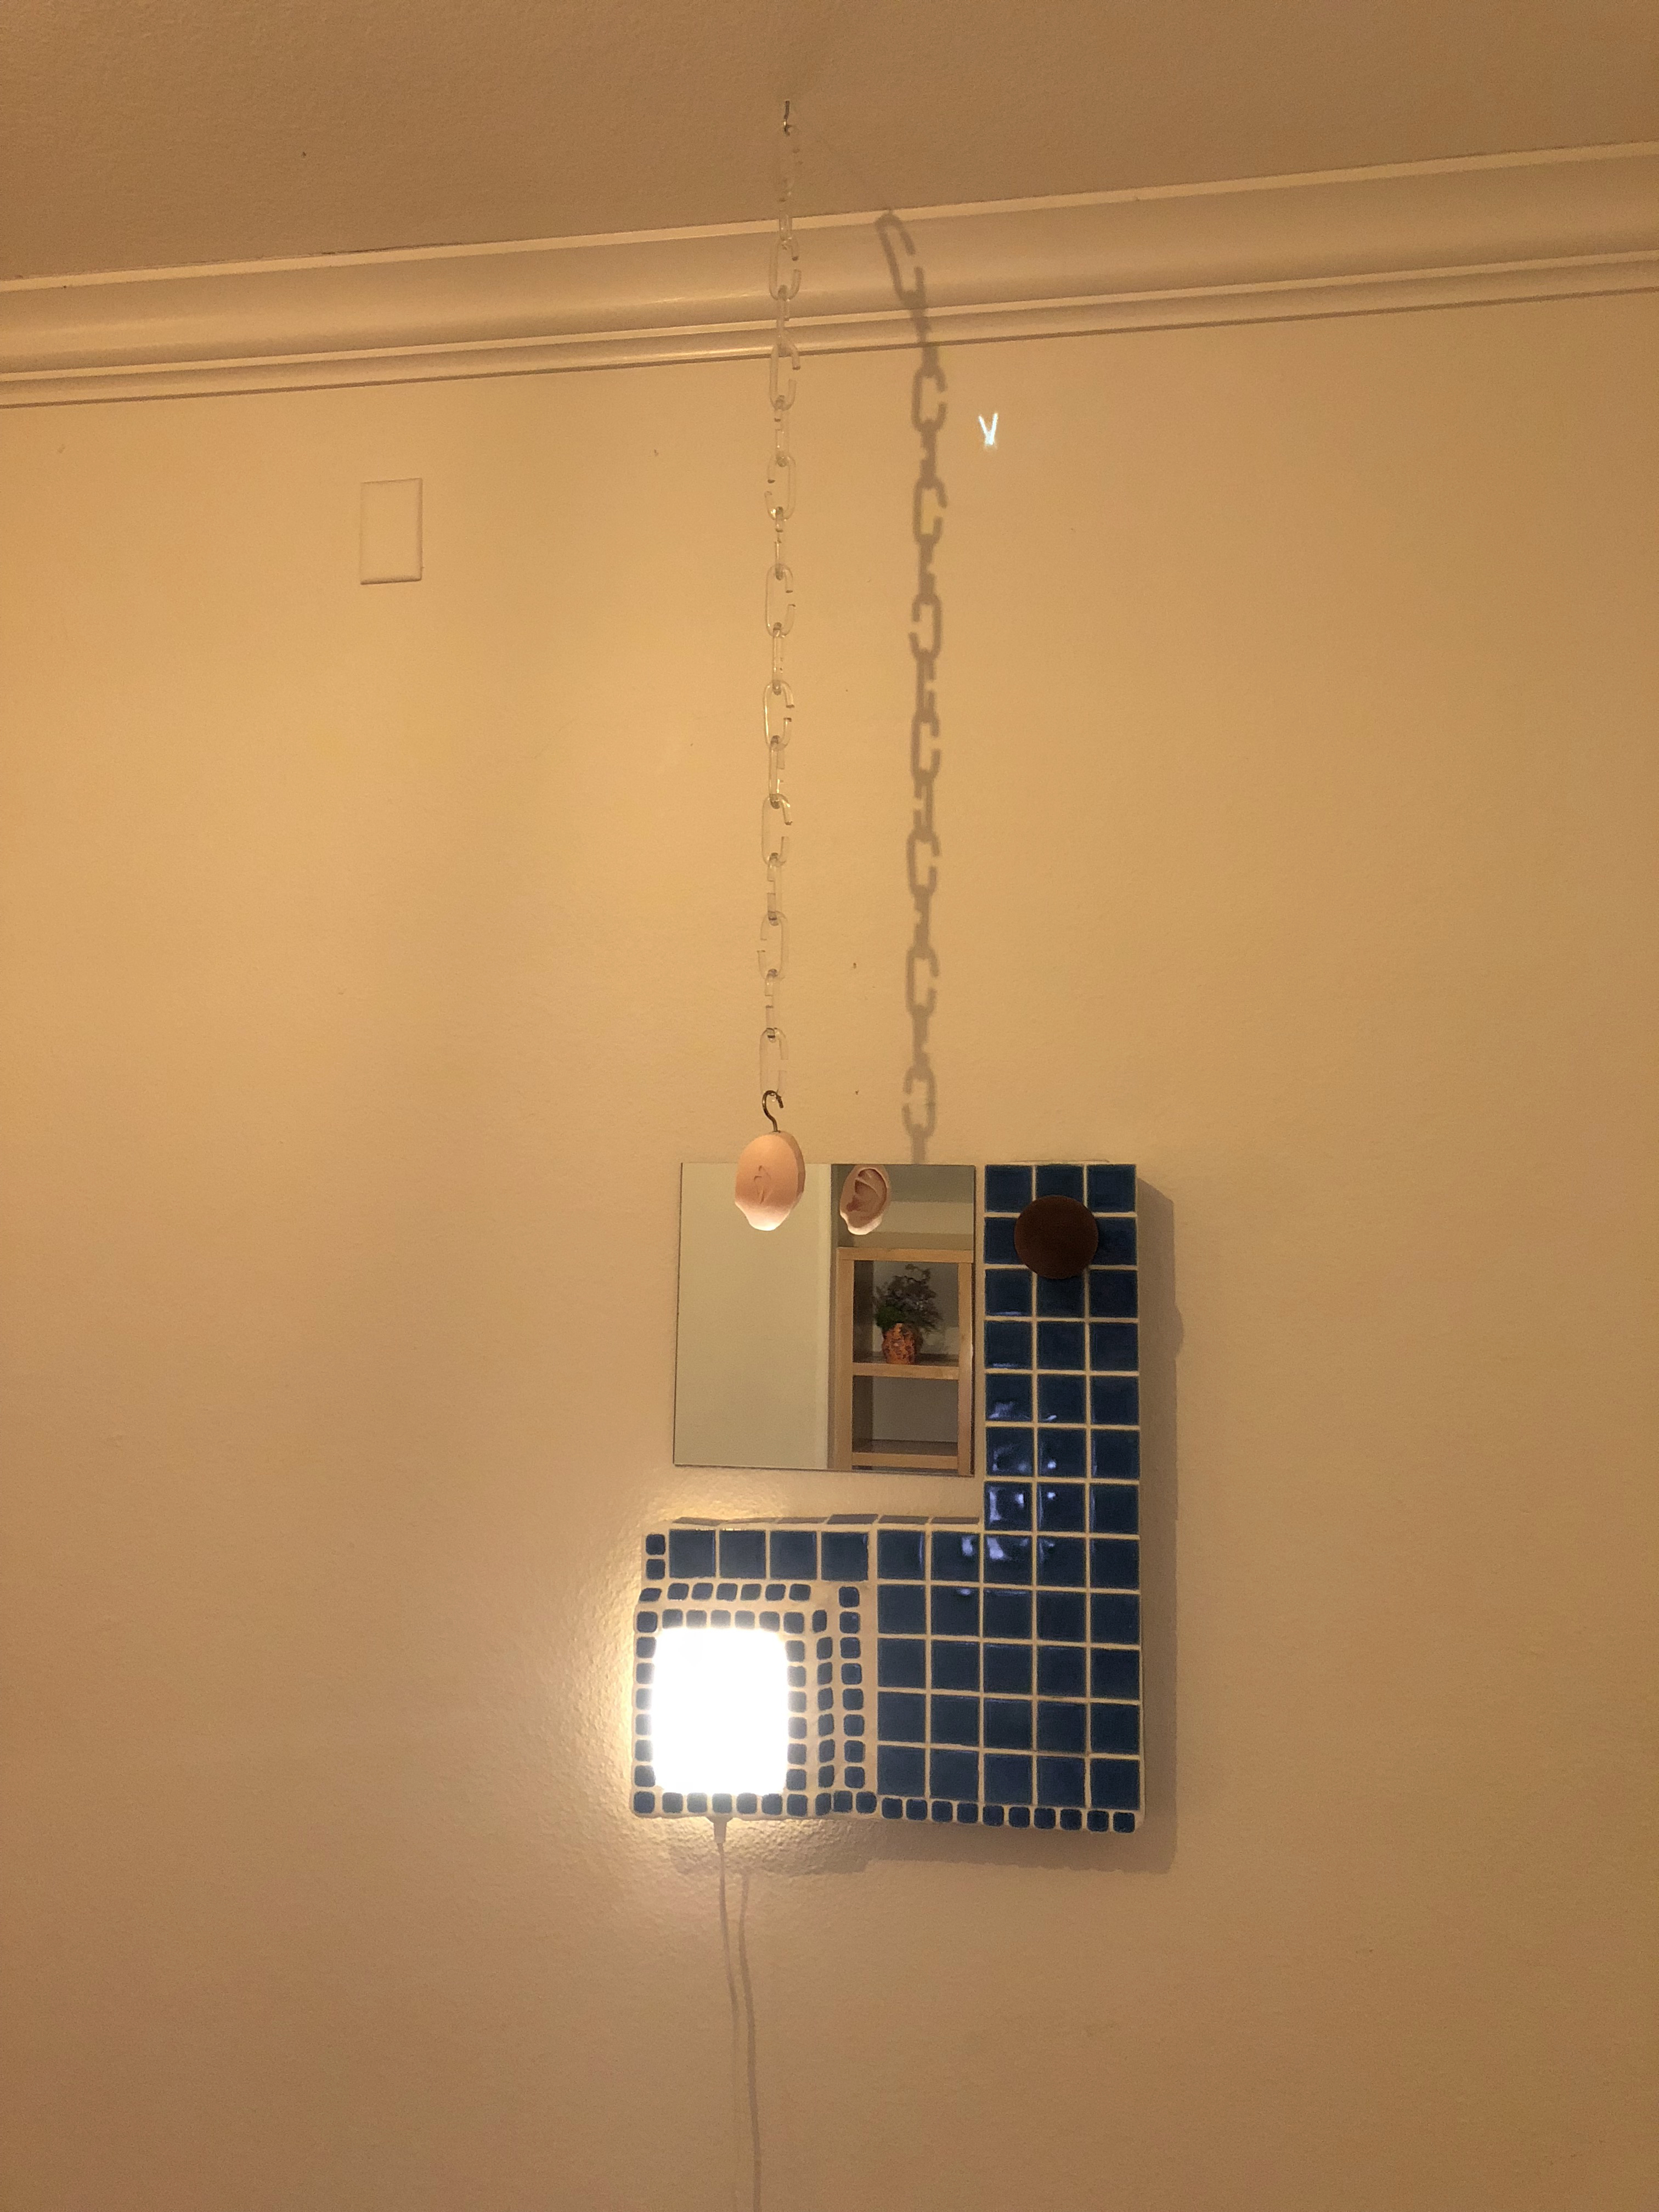 A sculptural wall lamp made of tile and mirror with a soap sculpture hung in front of it